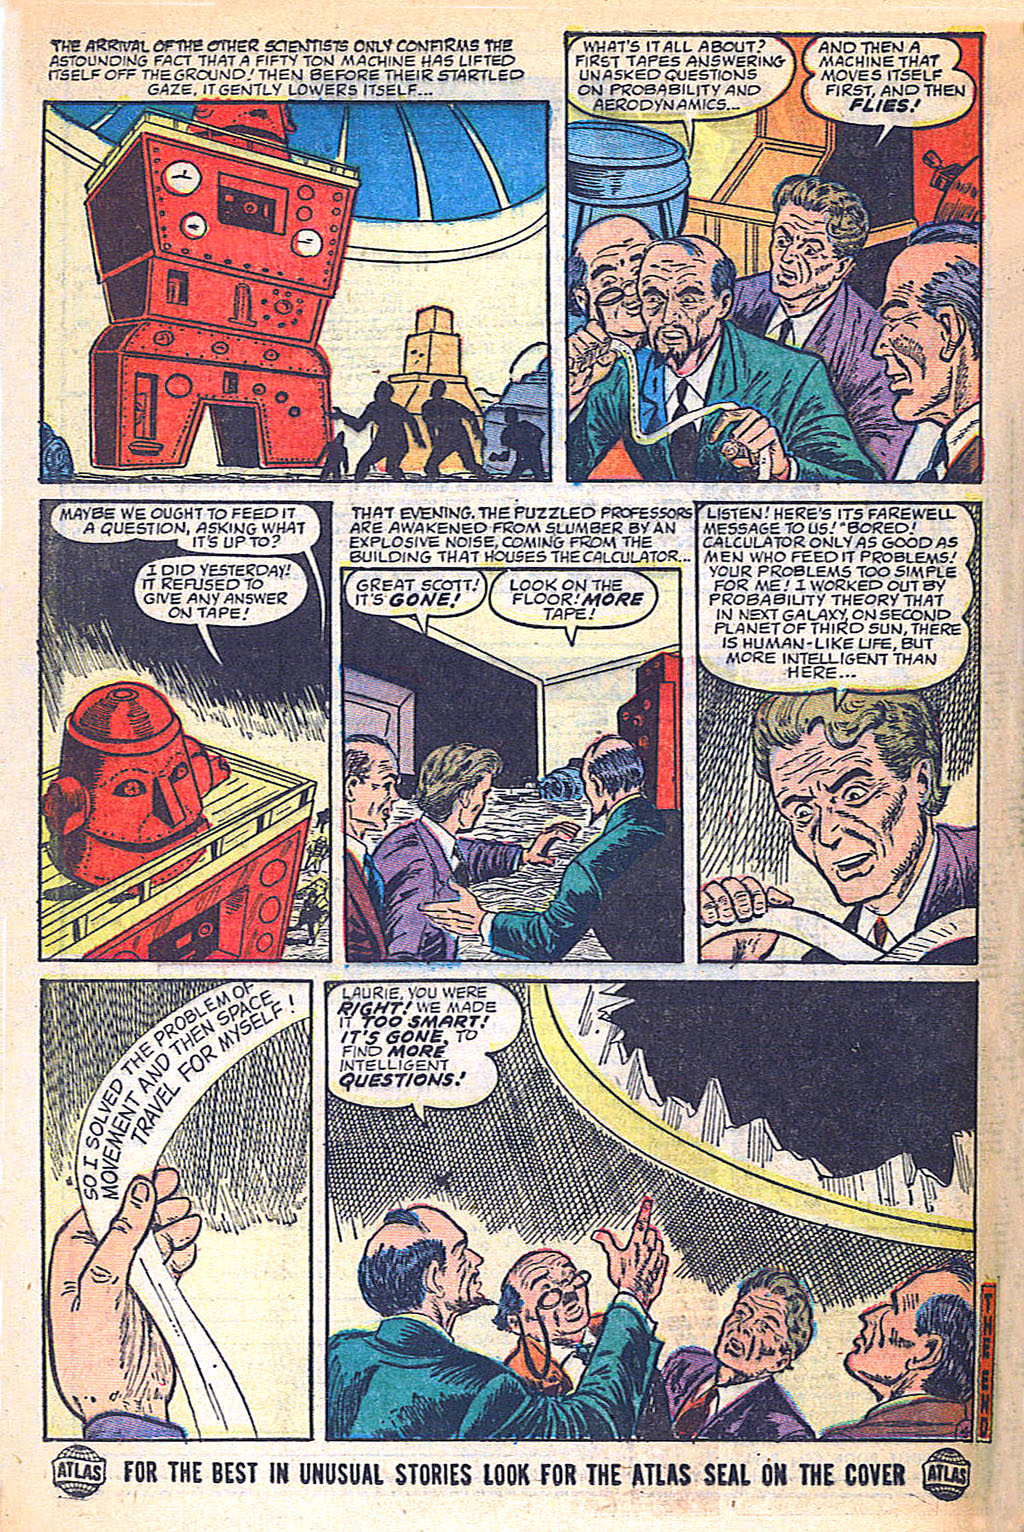 Journey Into Mystery (1952) 26 Page 19